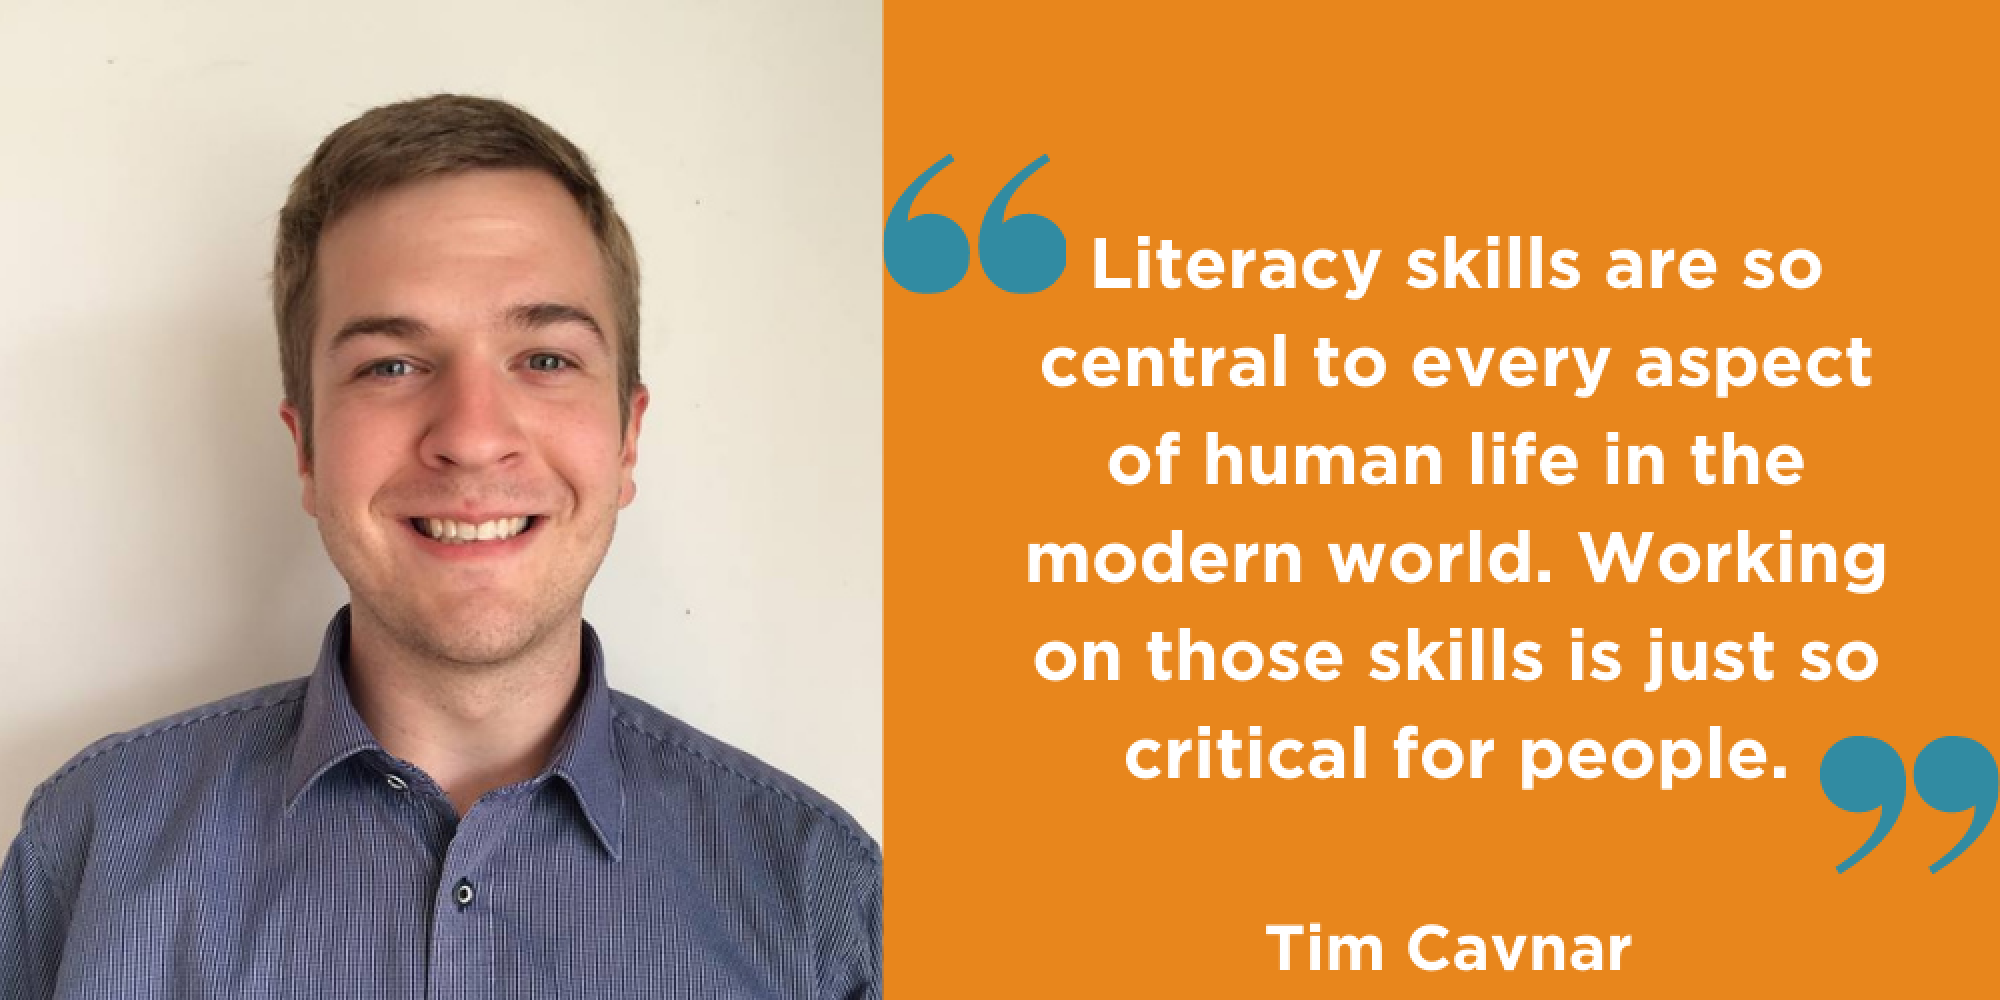 Tim Cavnar shares his experience with the Madison Writing Assistance program